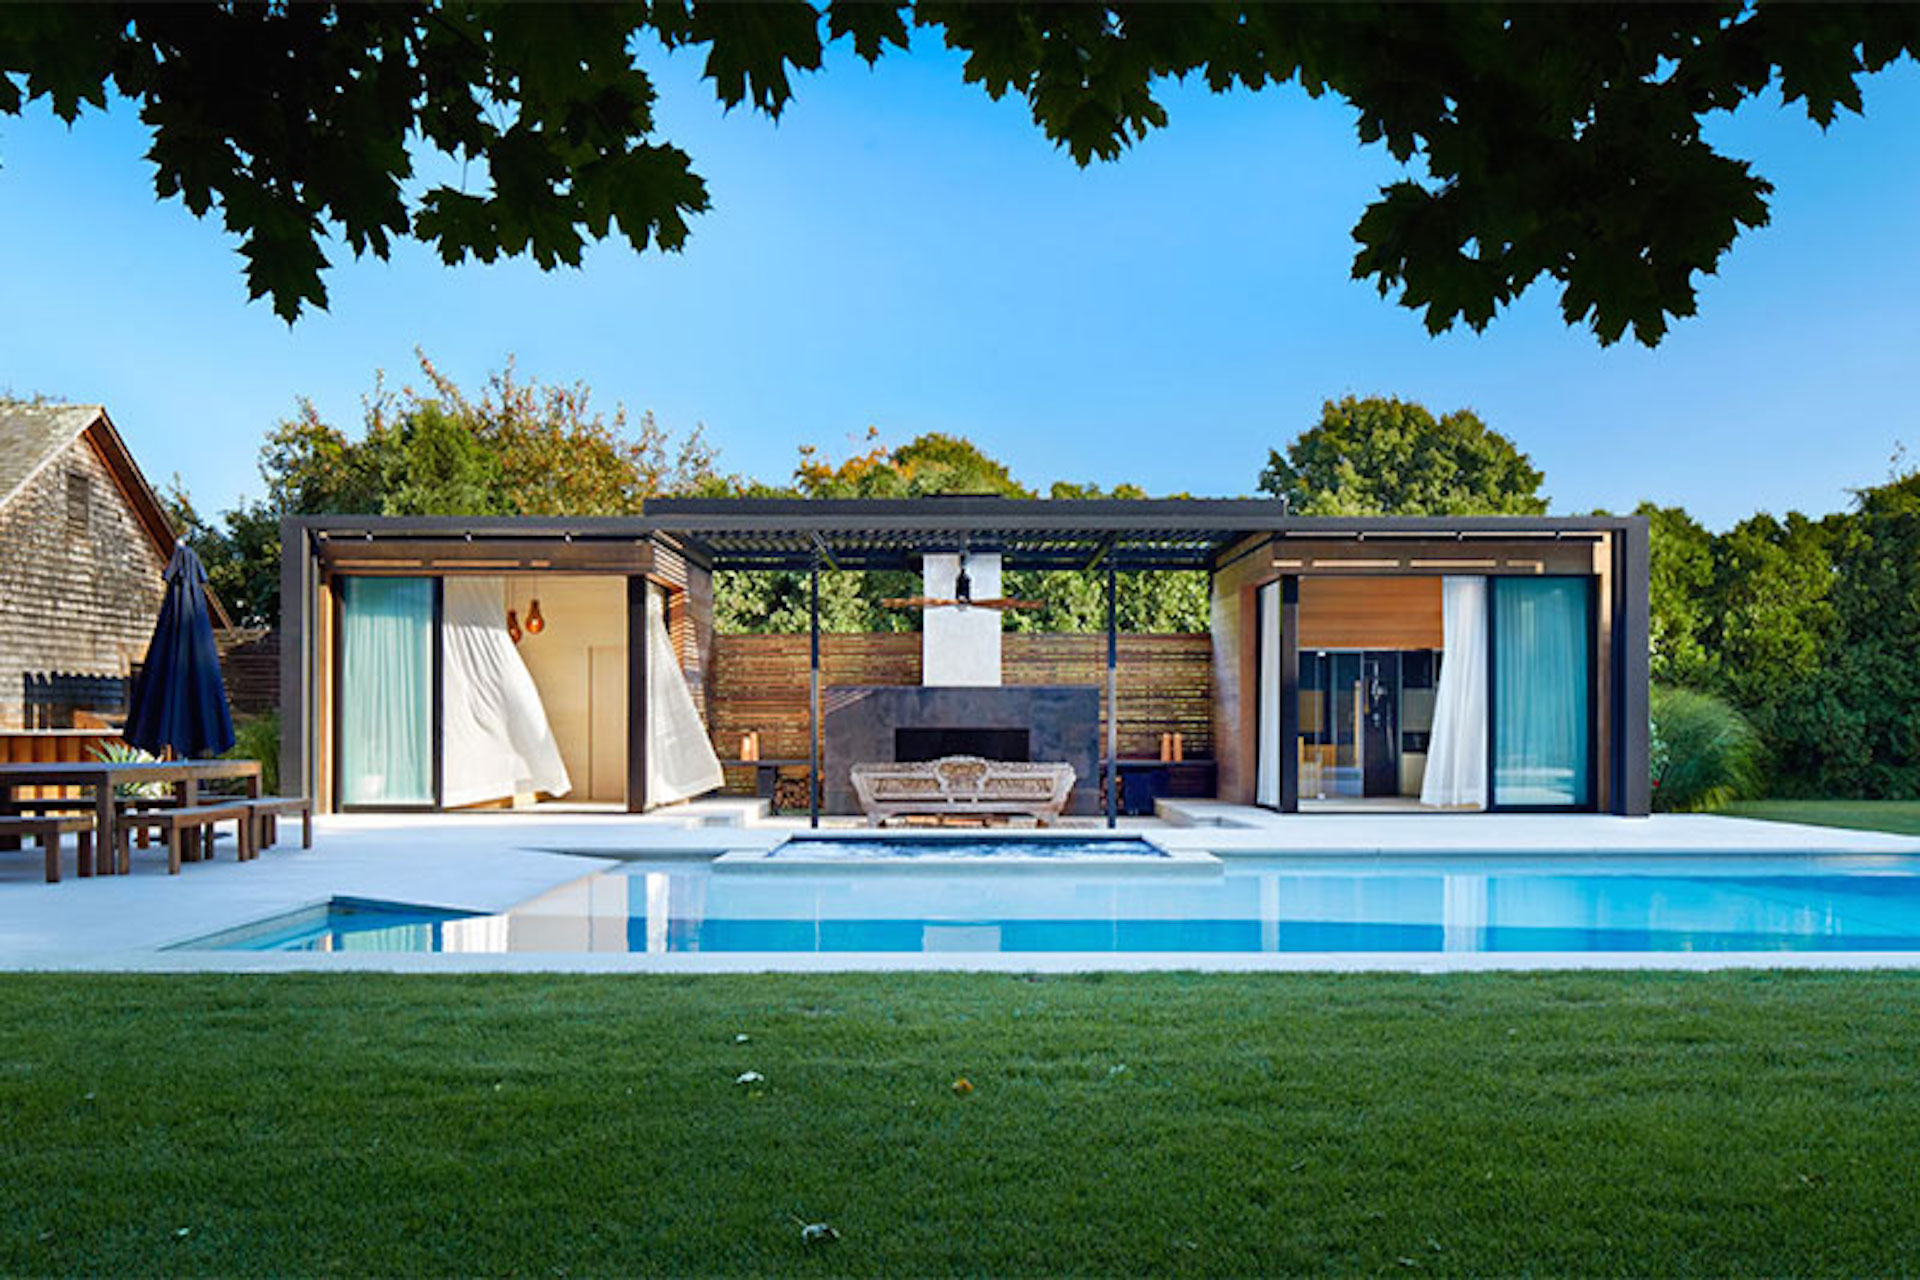 A modern pool house in Amagansett, NY designed by iCrave and photographed by John Muggenborg.